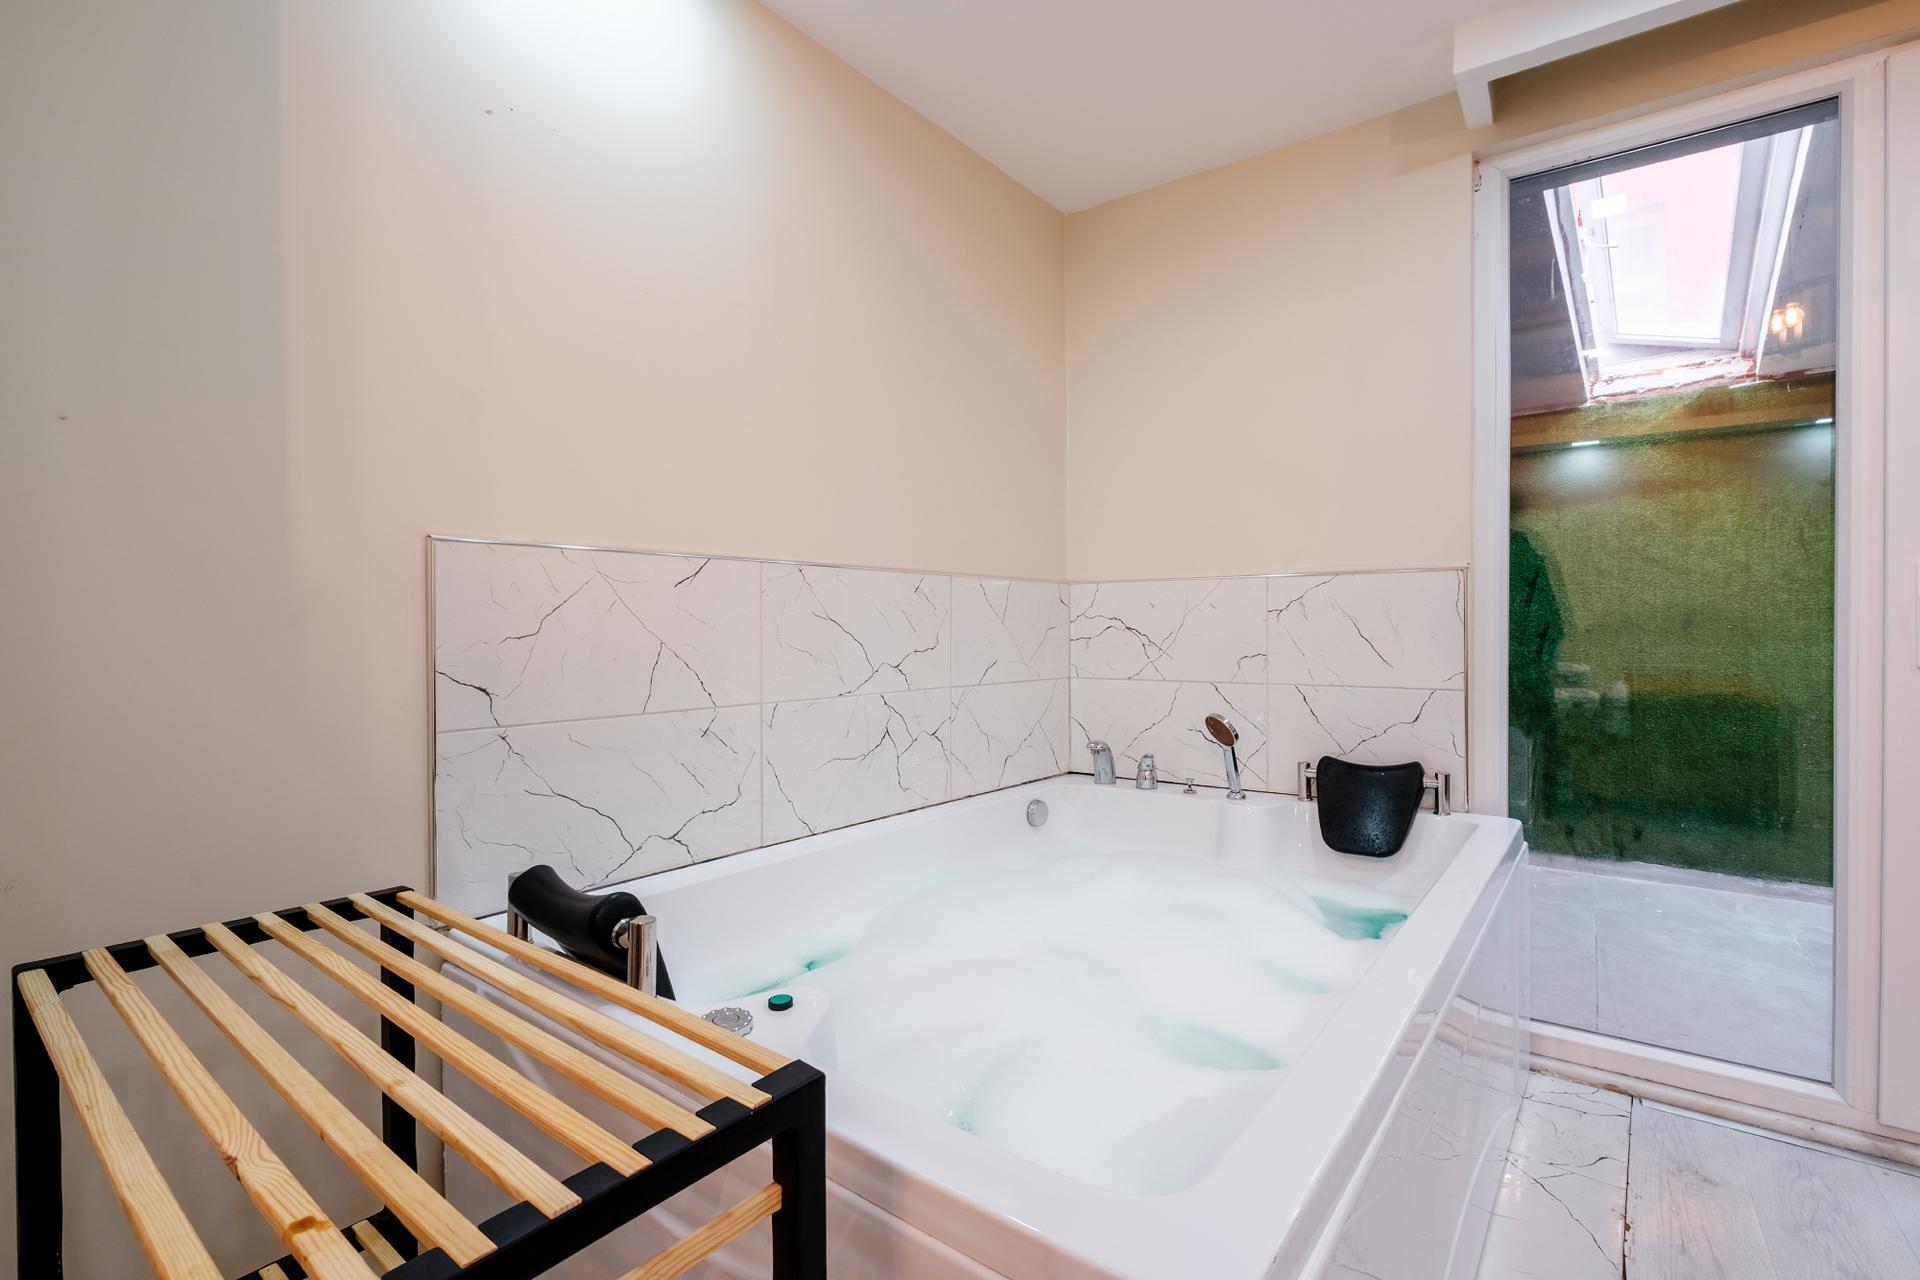 A tranquil jacuzzi retreat in the city's buzz.